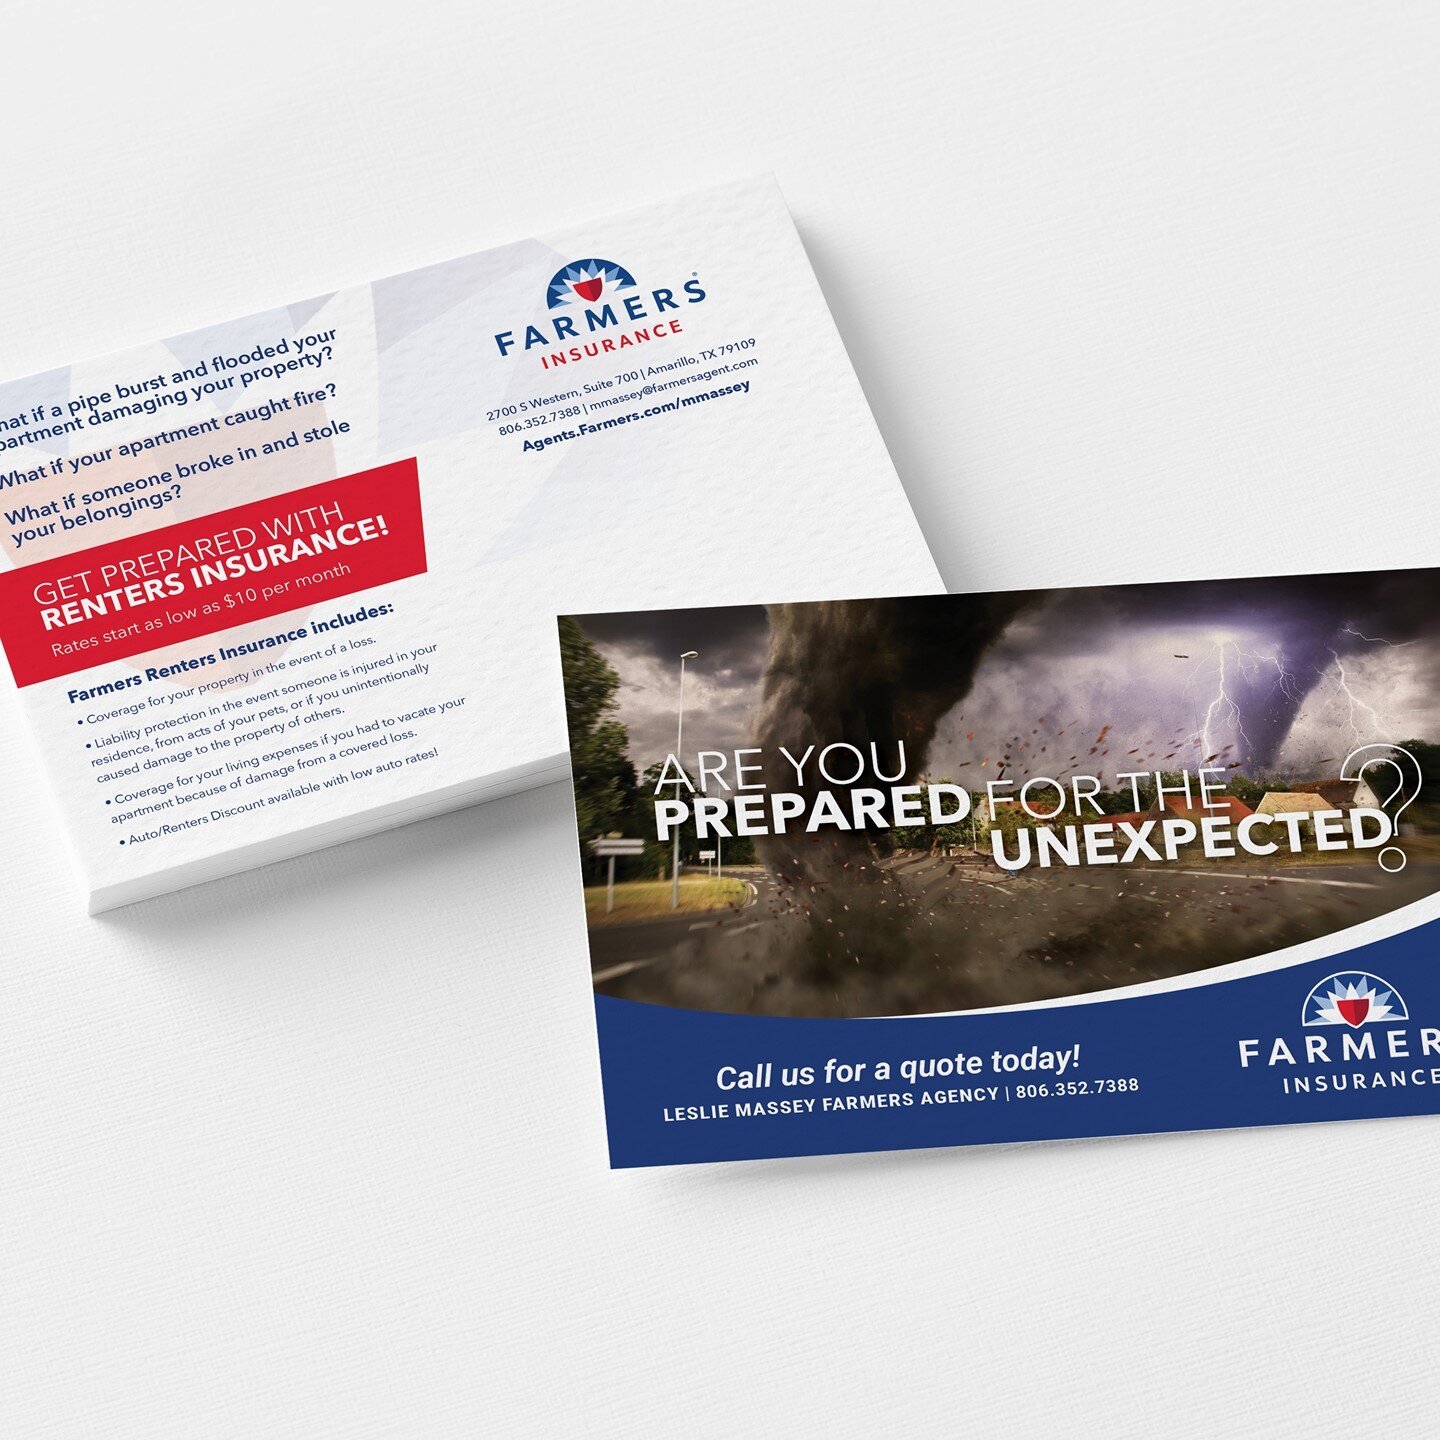 Let your customers know what services you offer with a direct mail piece. One of our designers designed this piece for Leslie Massey Farmers Agency. pps-mail.net

#pps #graphicdesign #directmail